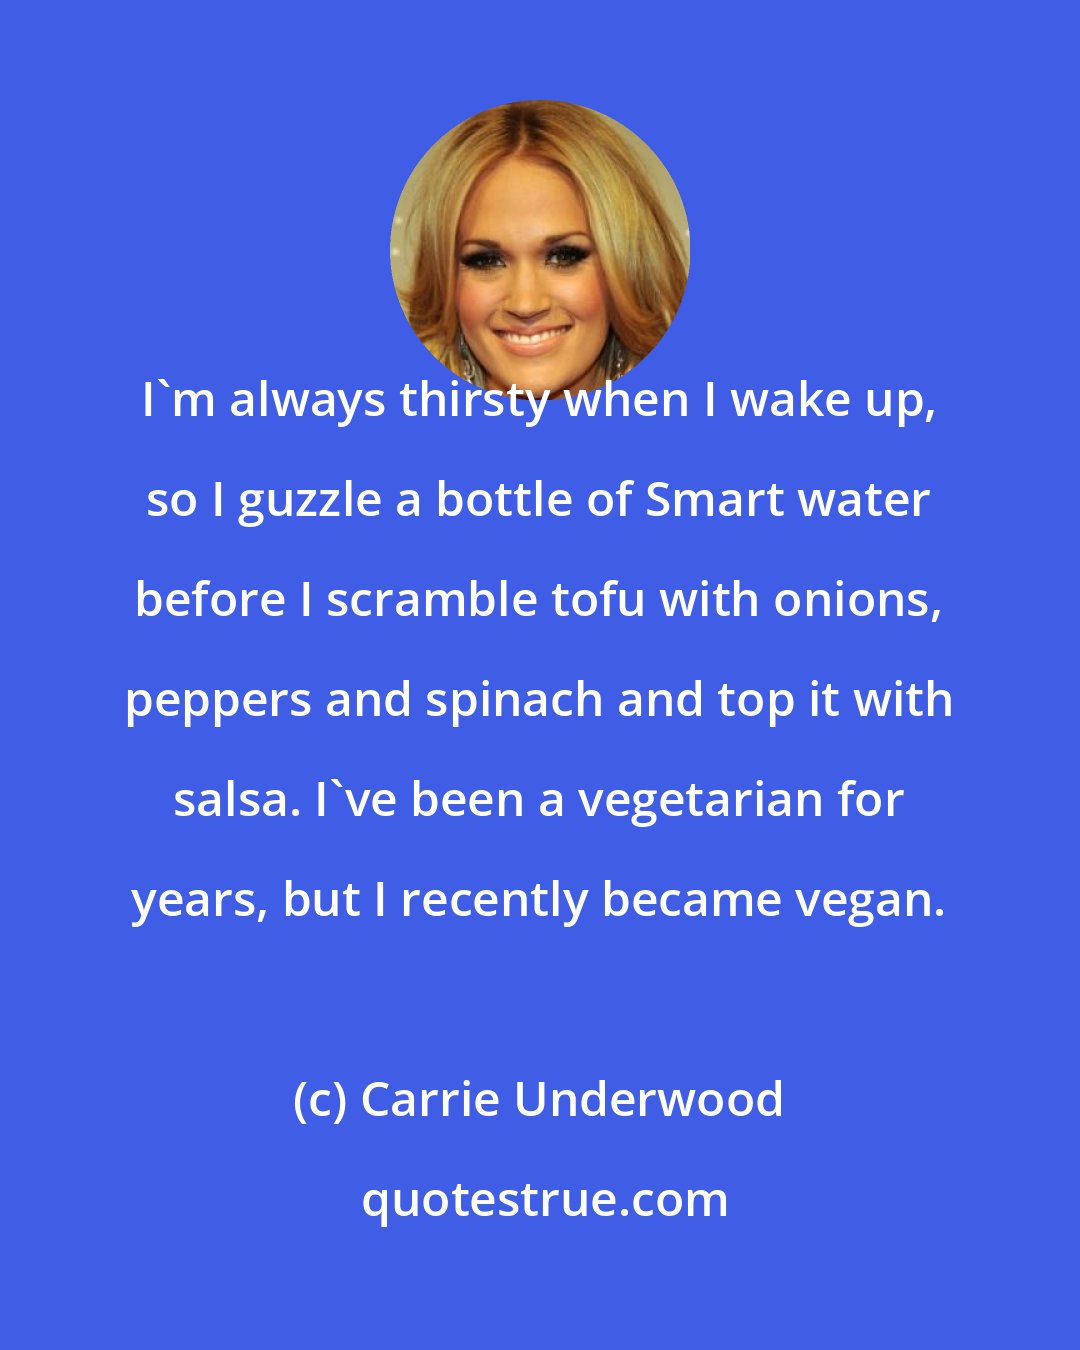 Carrie Underwood: I'm always thirsty when I wake up, so I guzzle a bottle of Smart water before I scramble tofu with onions, peppers and spinach and top it with salsa. I've been a vegetarian for years, but I recently became vegan.